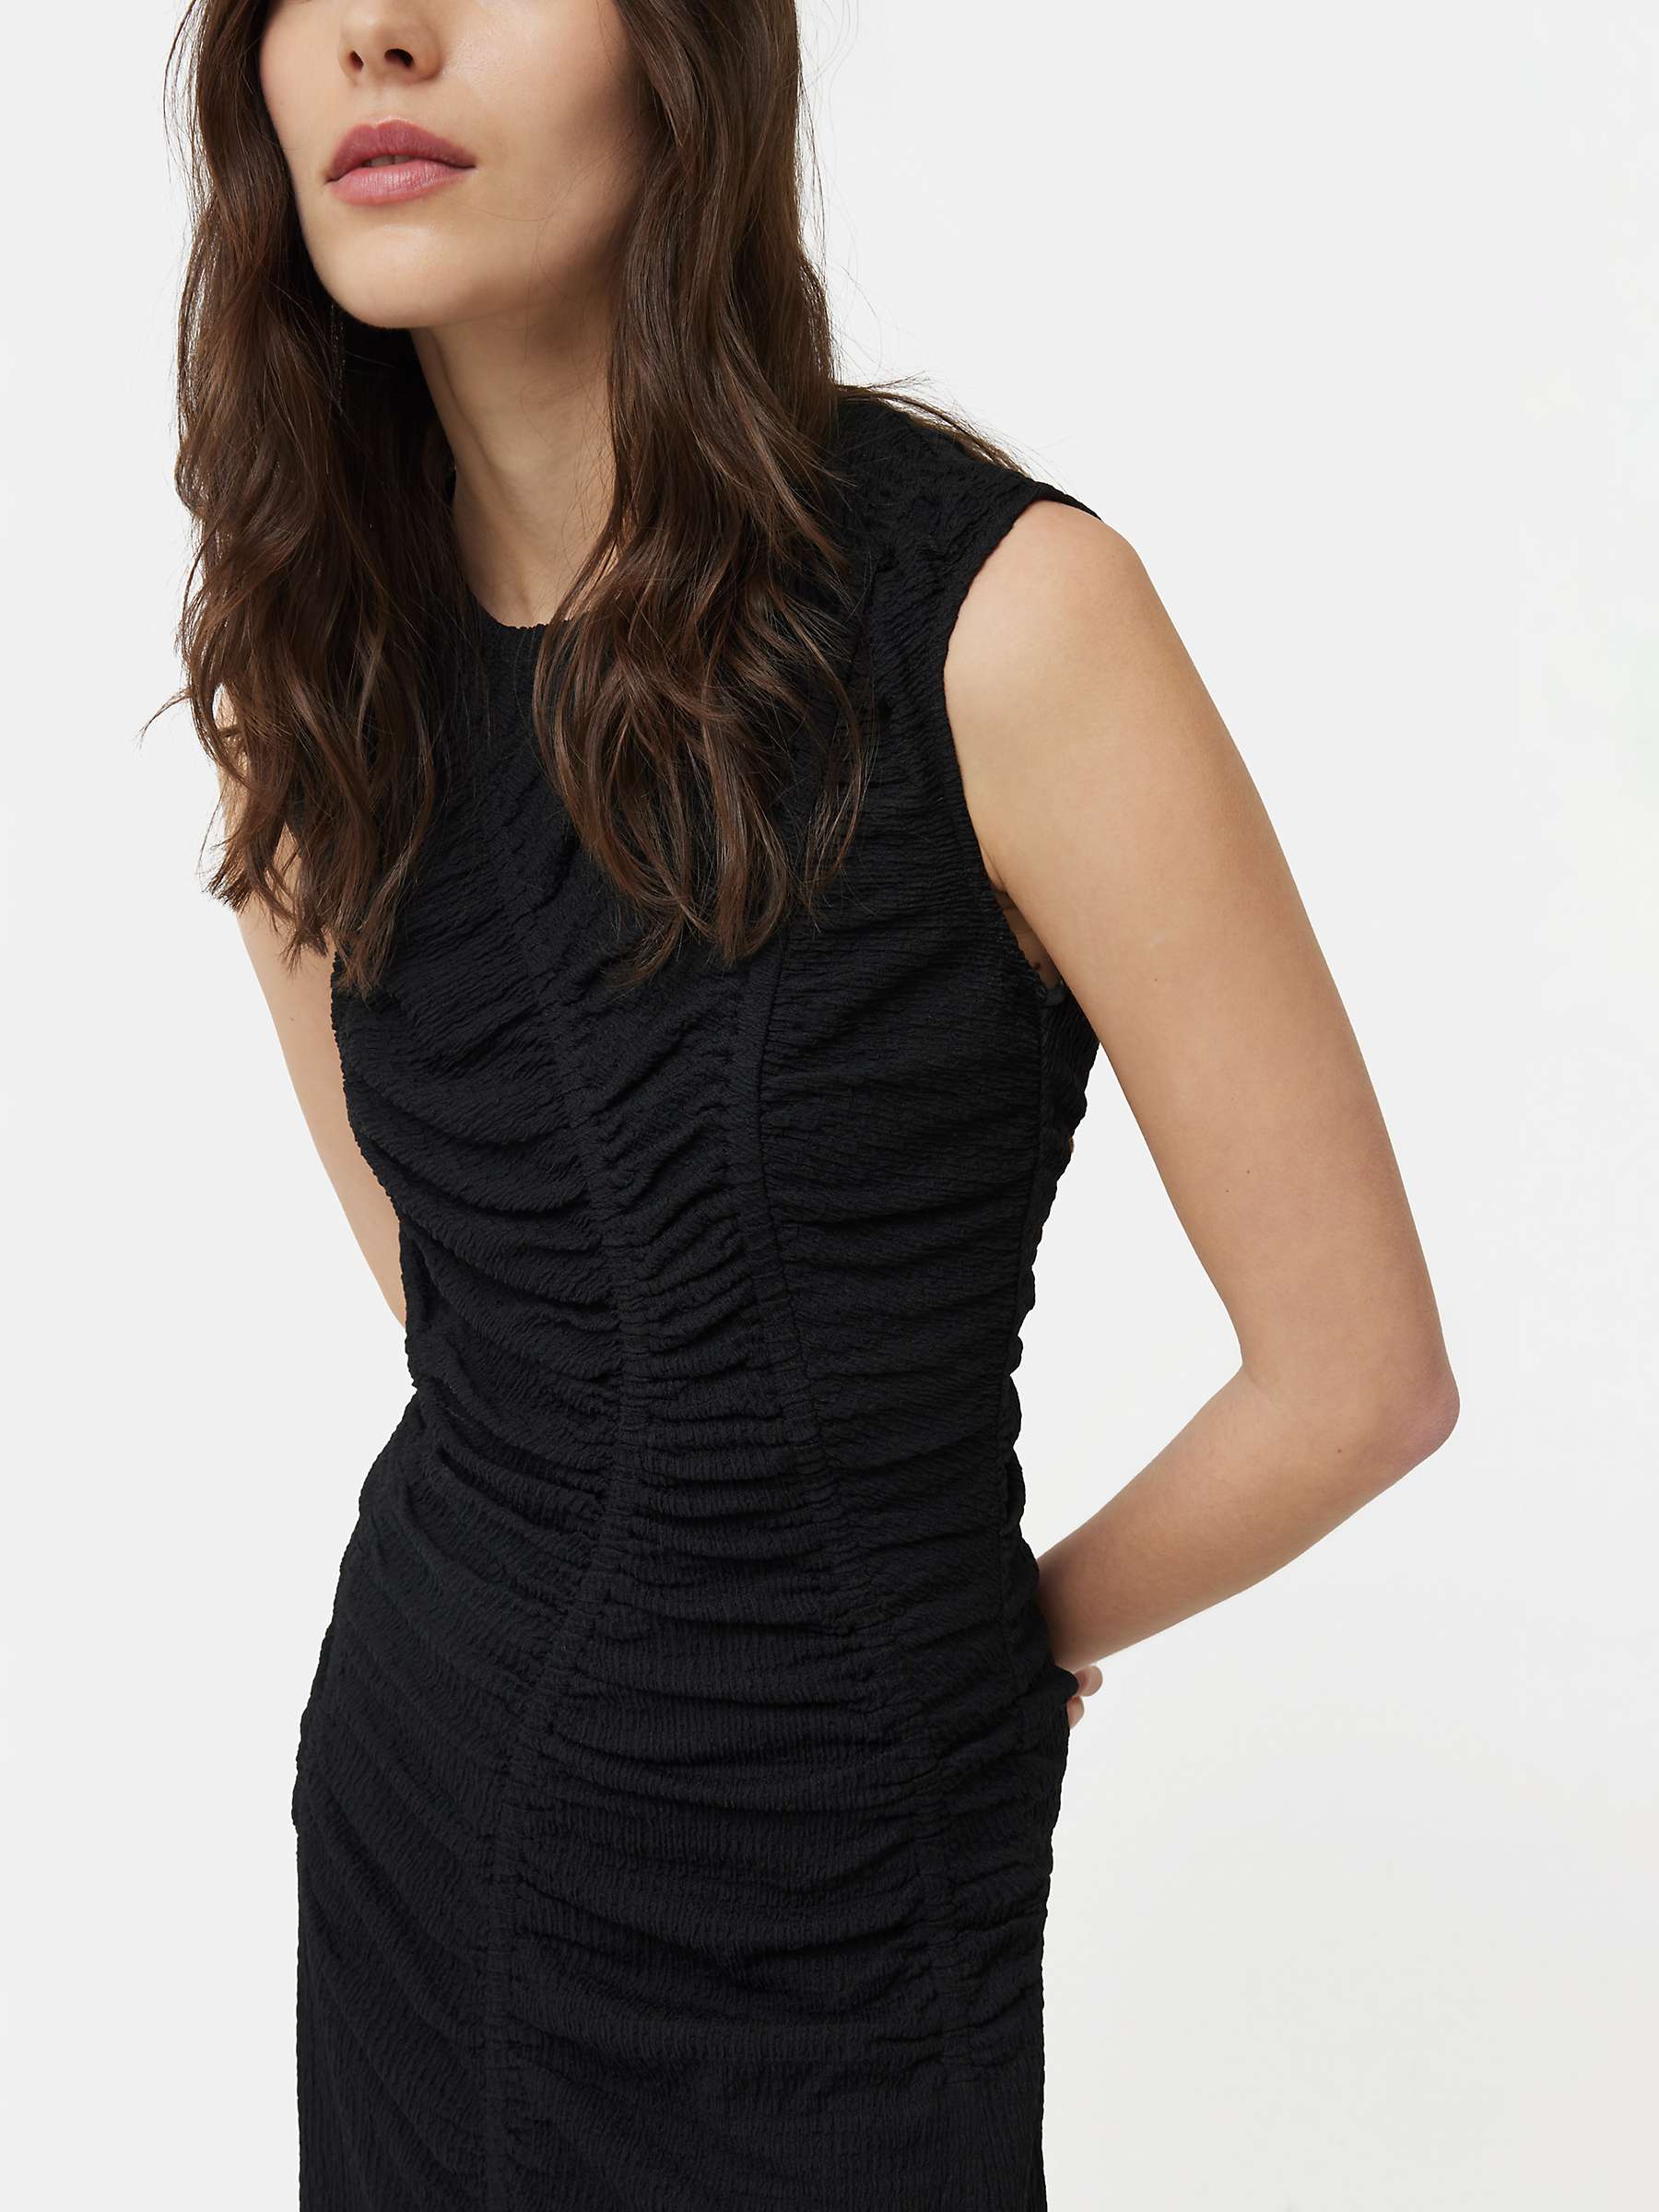 Buy Jigsaw Ruched Channel Jersey Midi Dress, Black Online at johnlewis.com